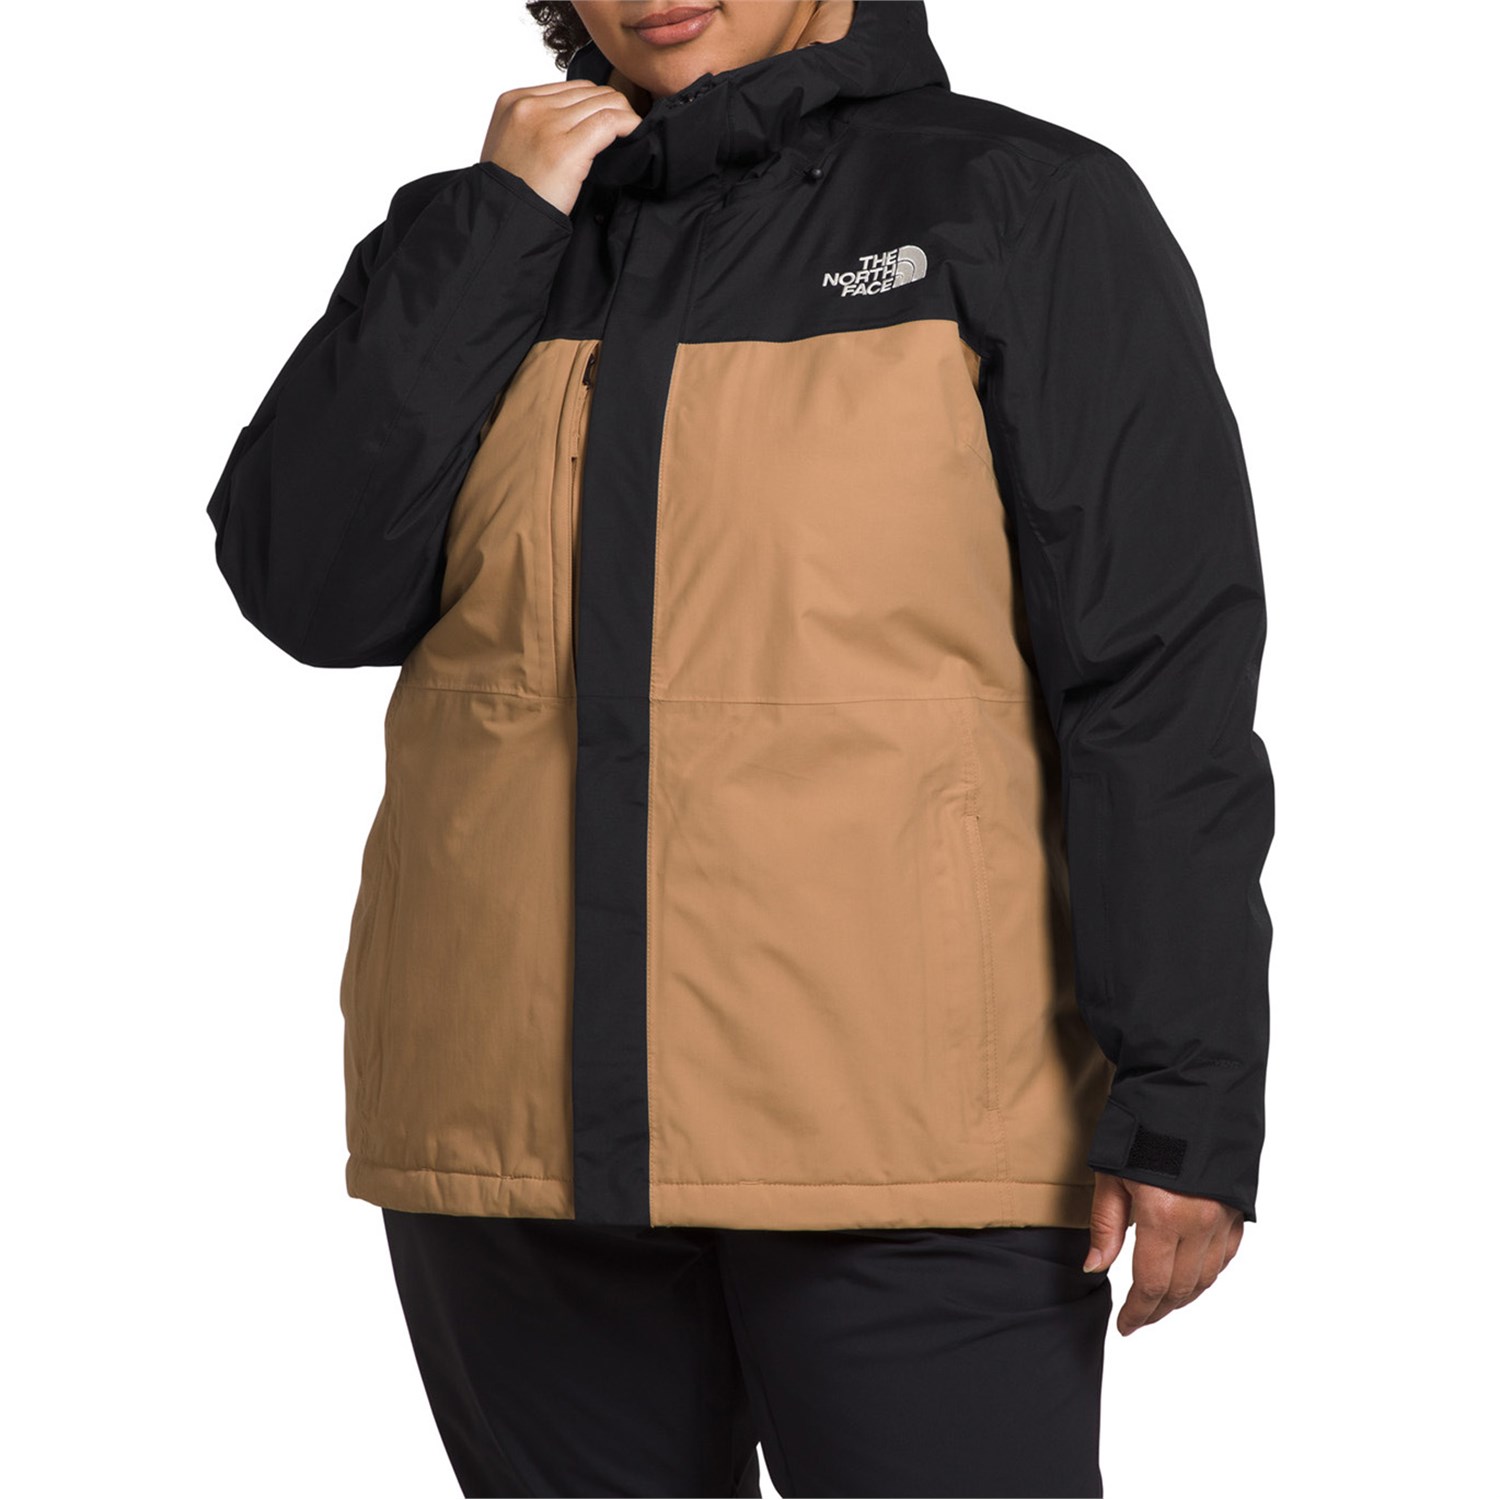 Куртка The North Face Freedom Insulated Plus, цвет TNF Black/Almond Butter куртка the north face insulated бежевый черный